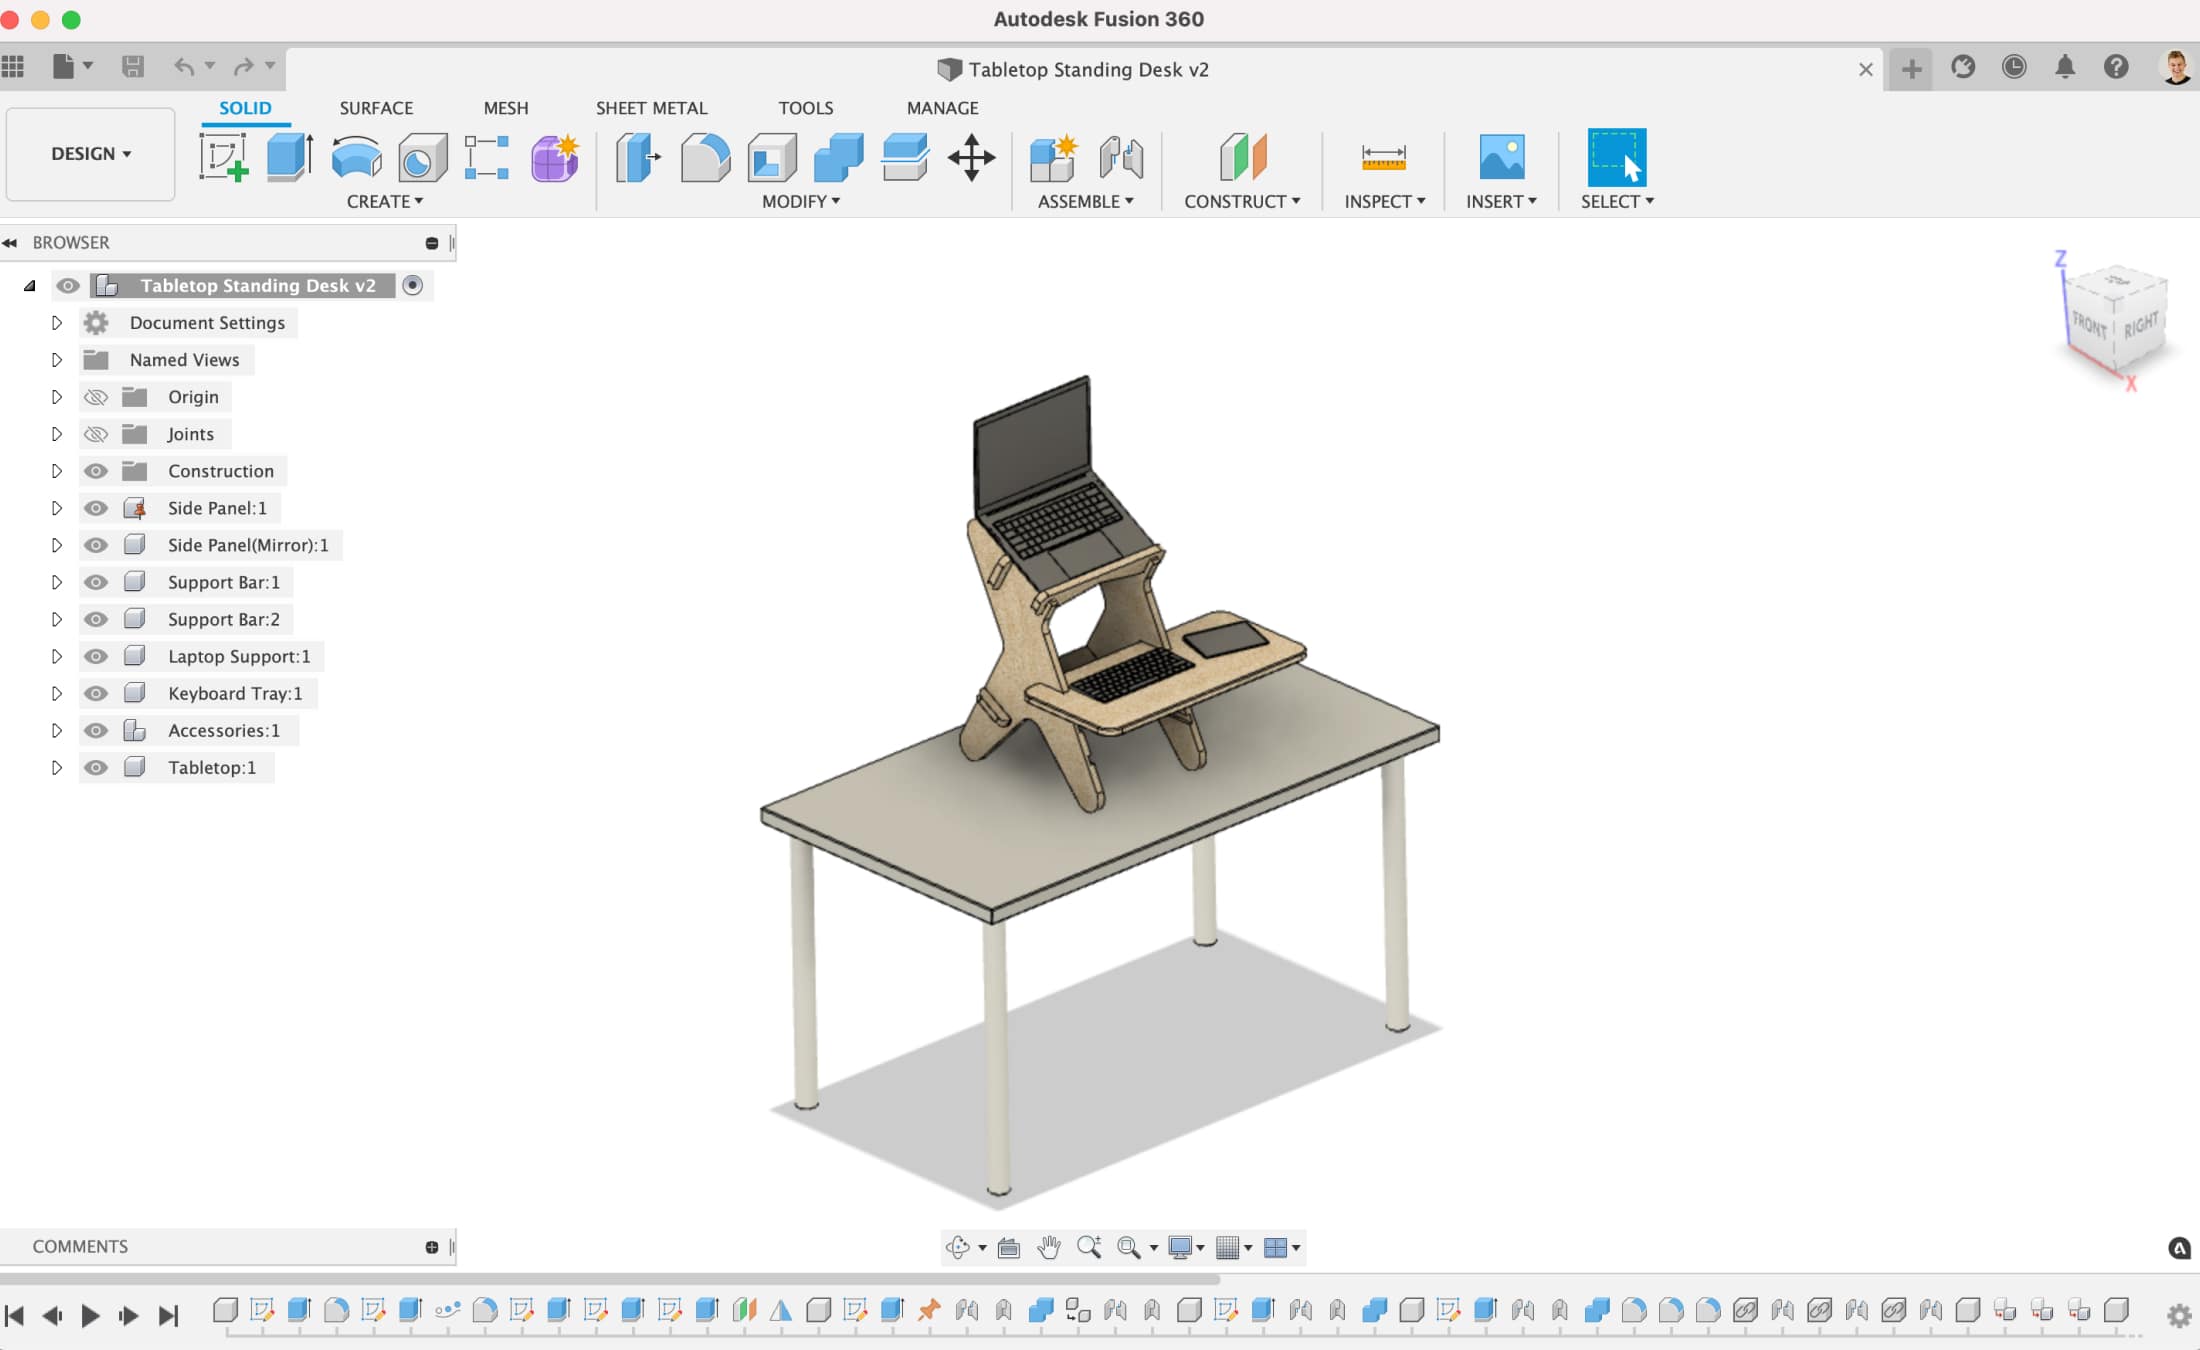 autodesk fusion 360 free for hobbyists